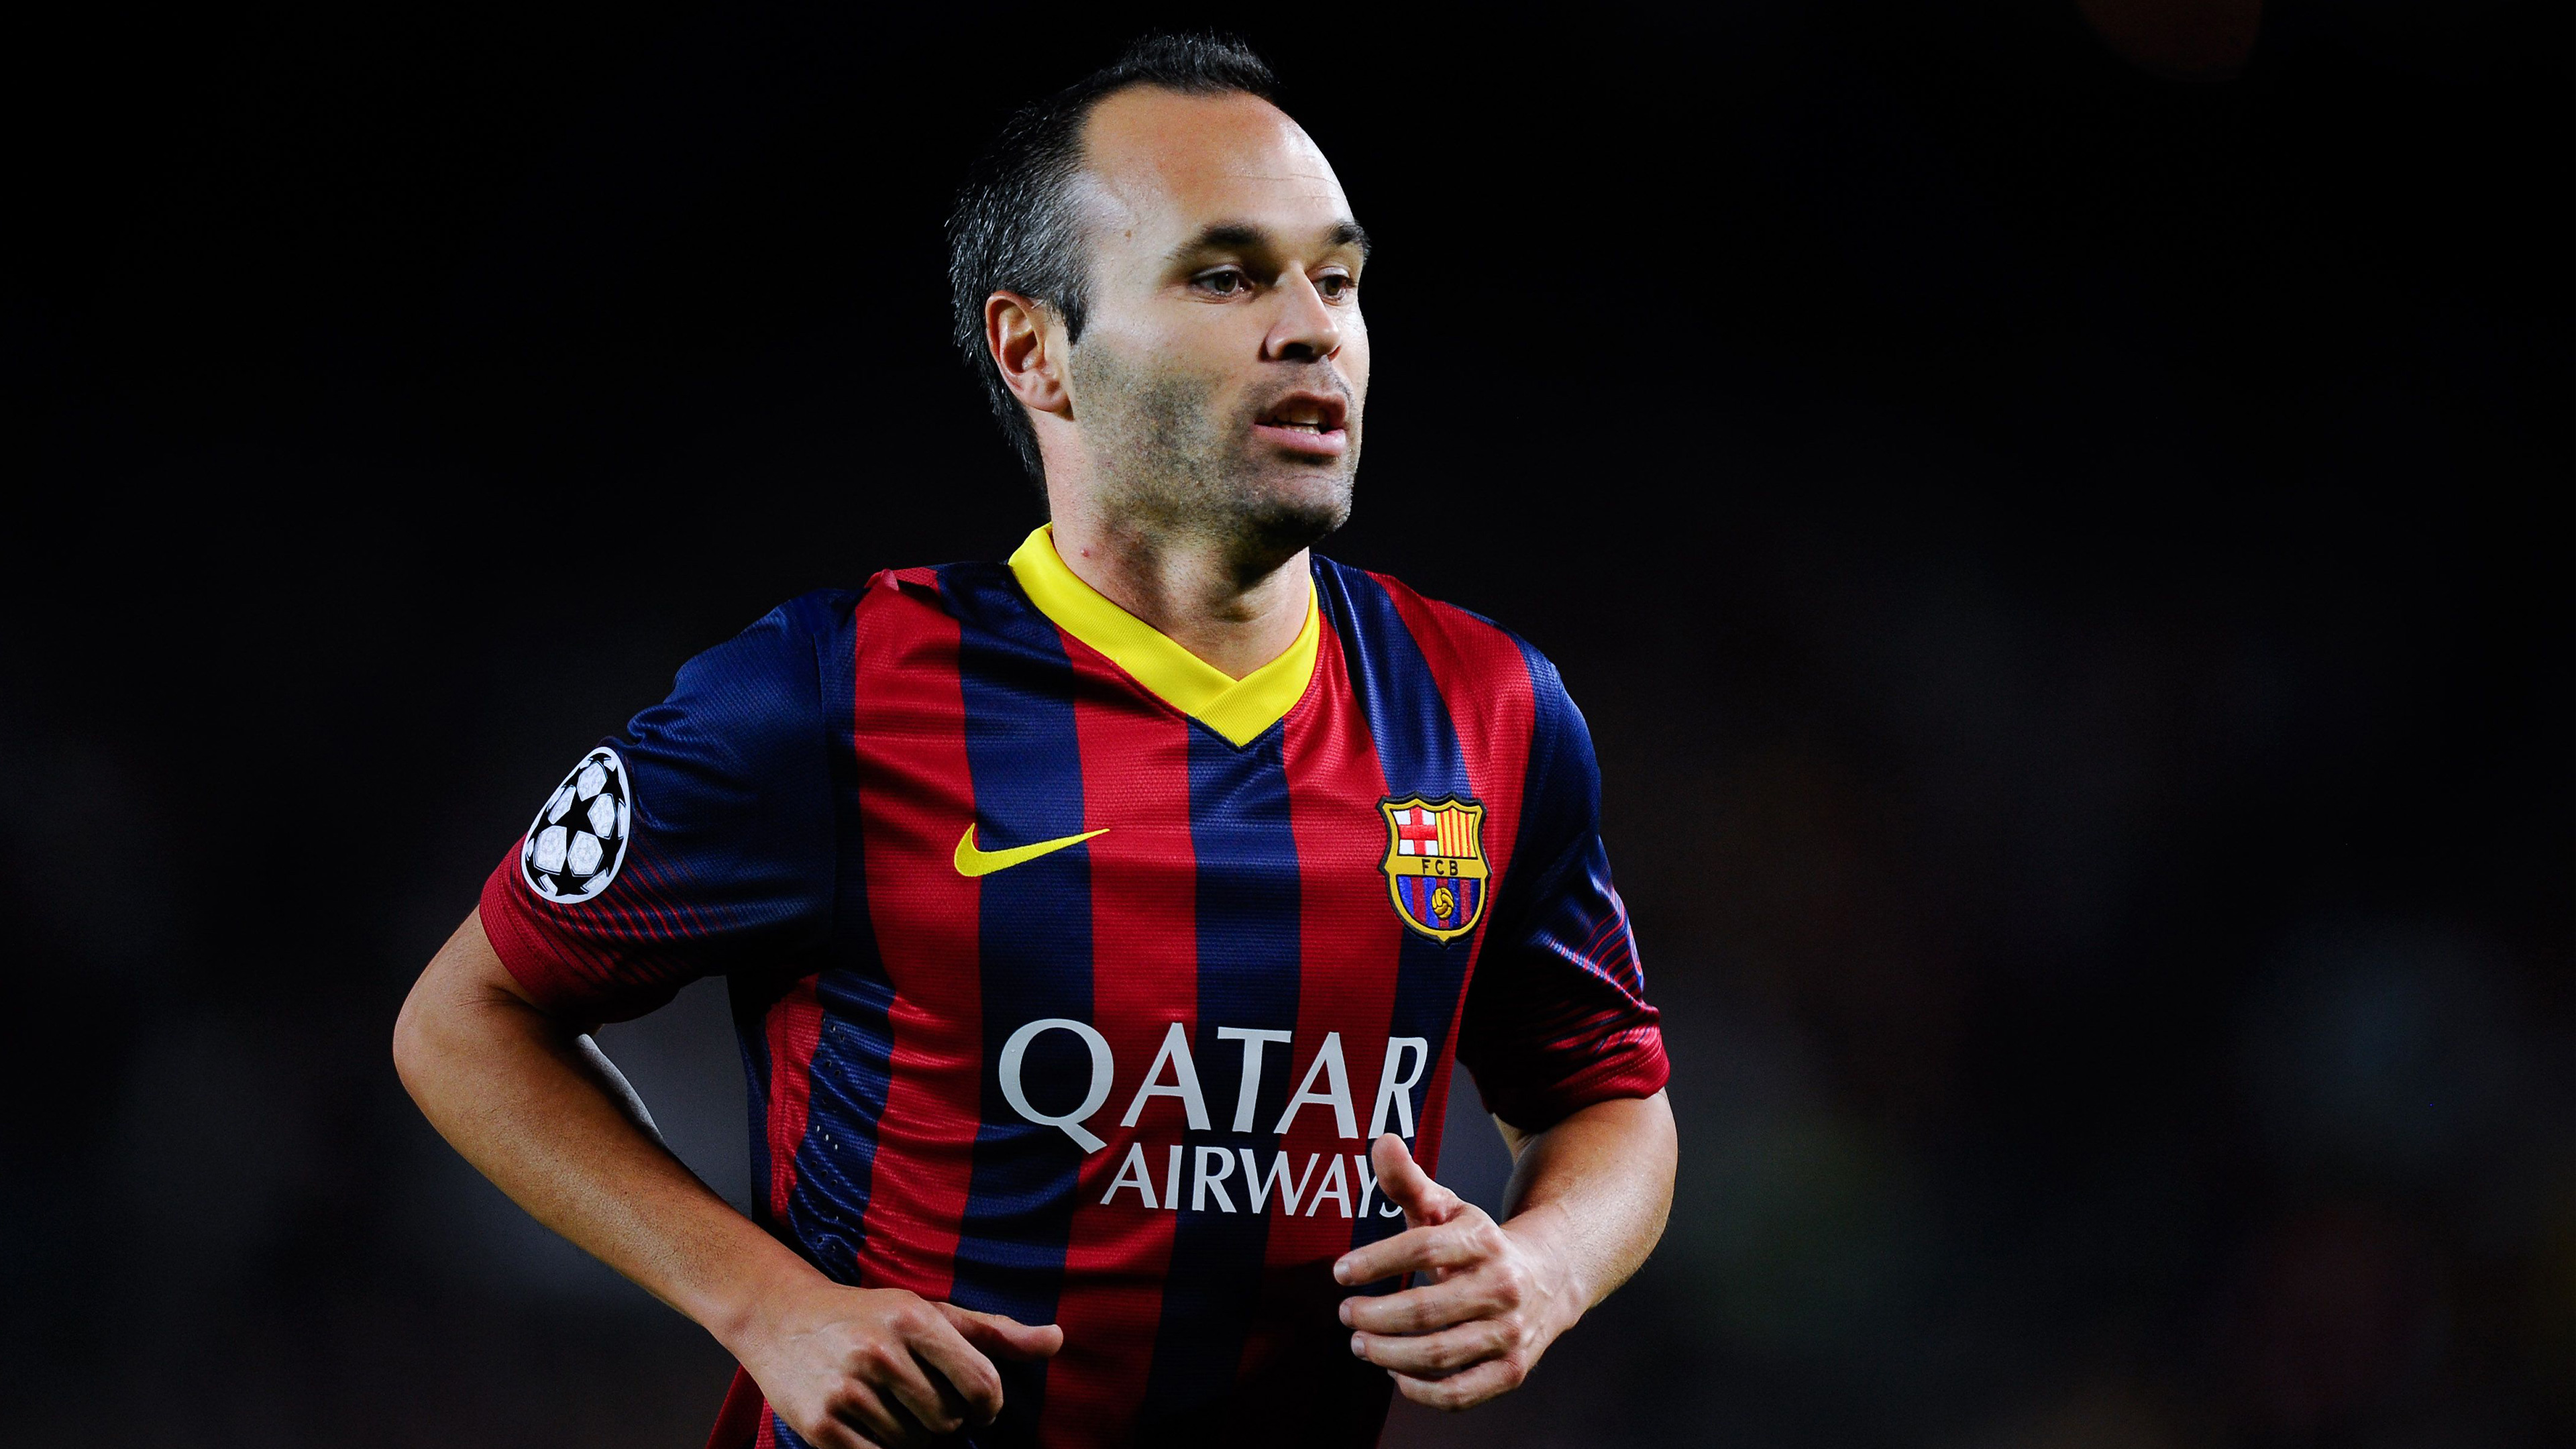 Andres Iniesta2513116816 - Napoli Barcellona Champions League , HD Wallpaper & Backgrounds